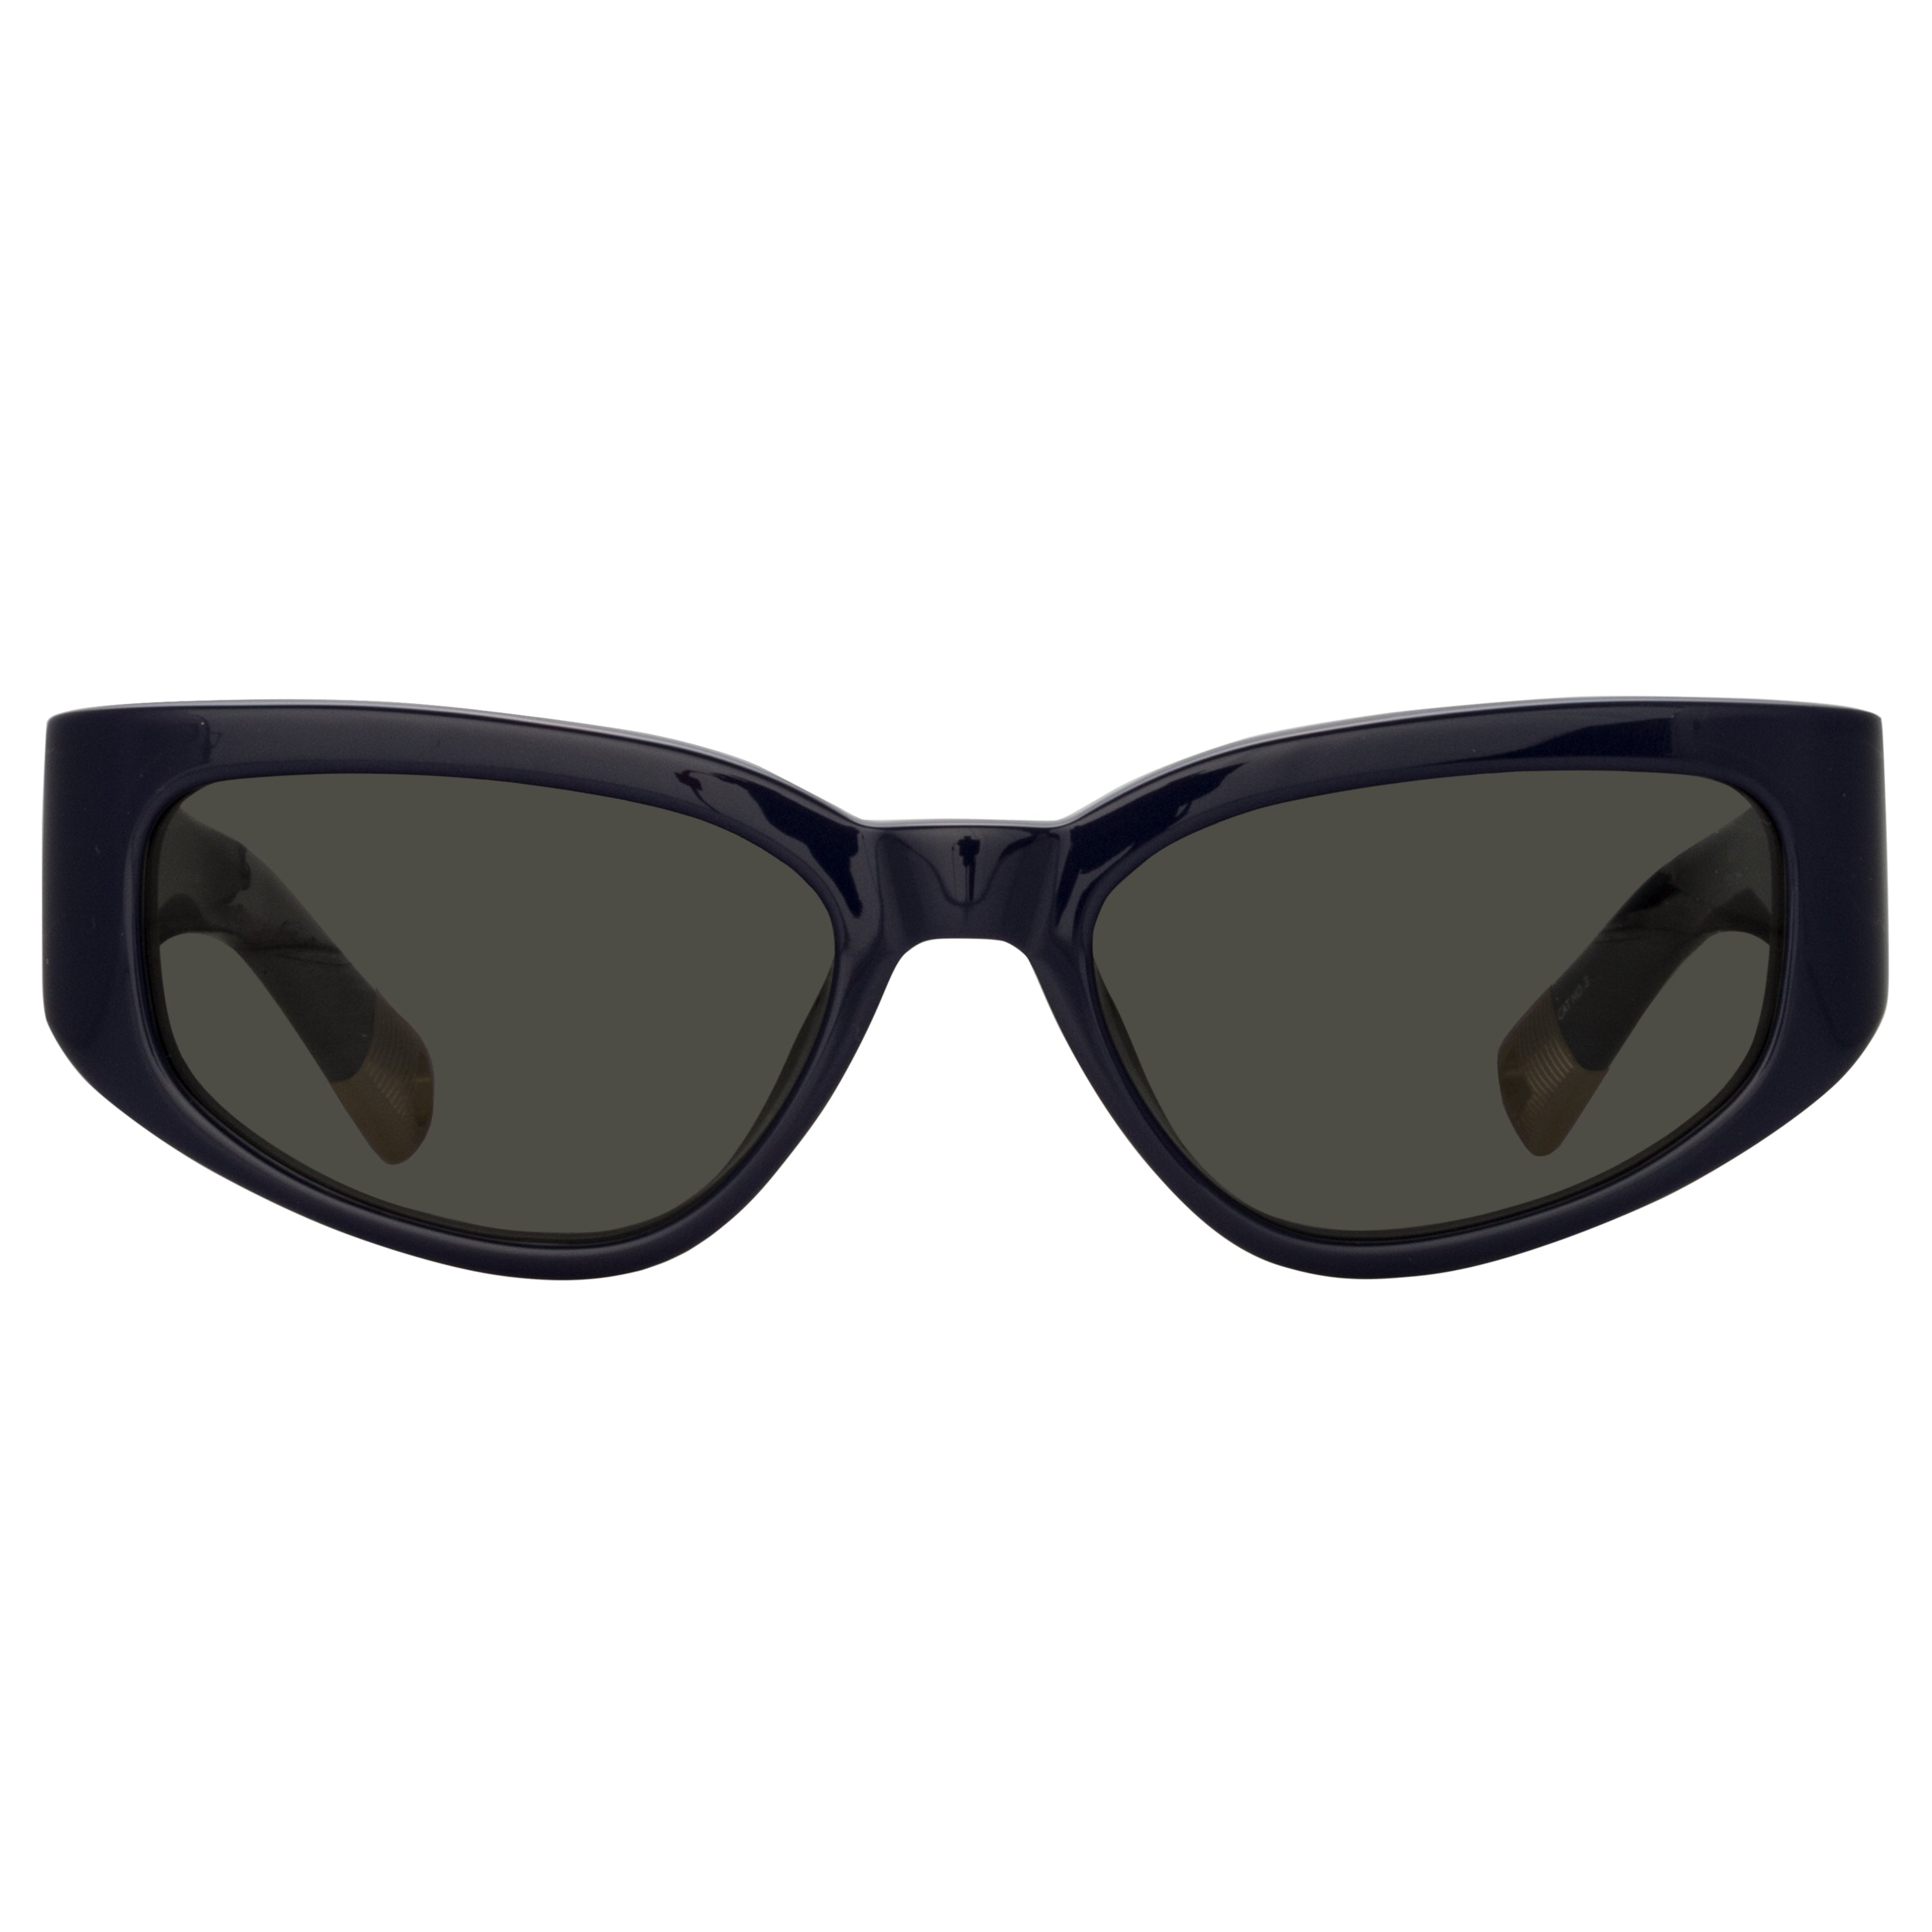 Gala Cat Eye Sunglasses in Navy by Jacquemus